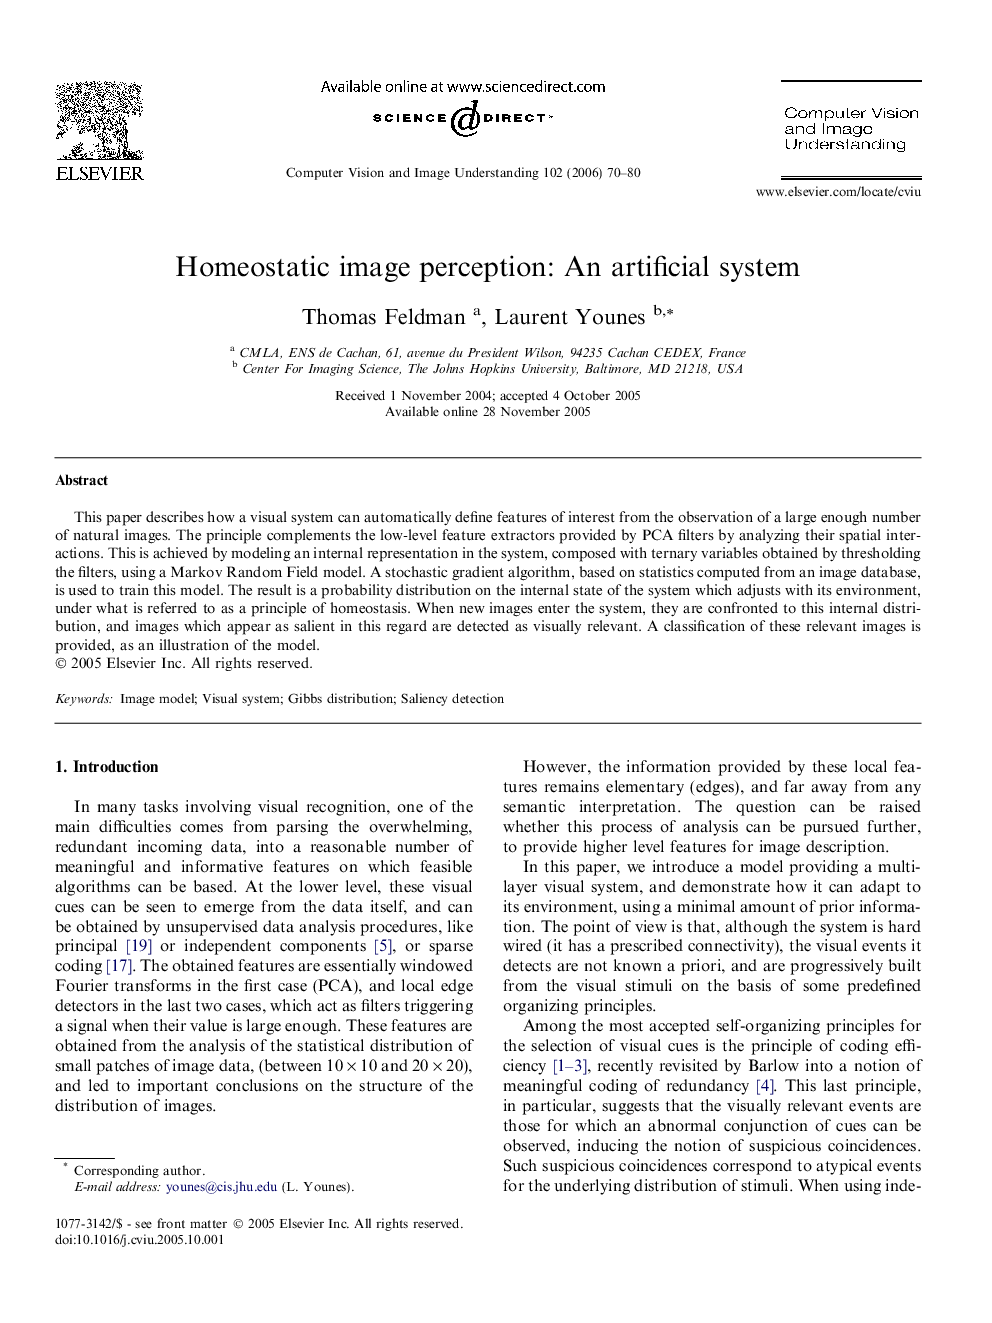 Homeostatic image perception: An artificial system